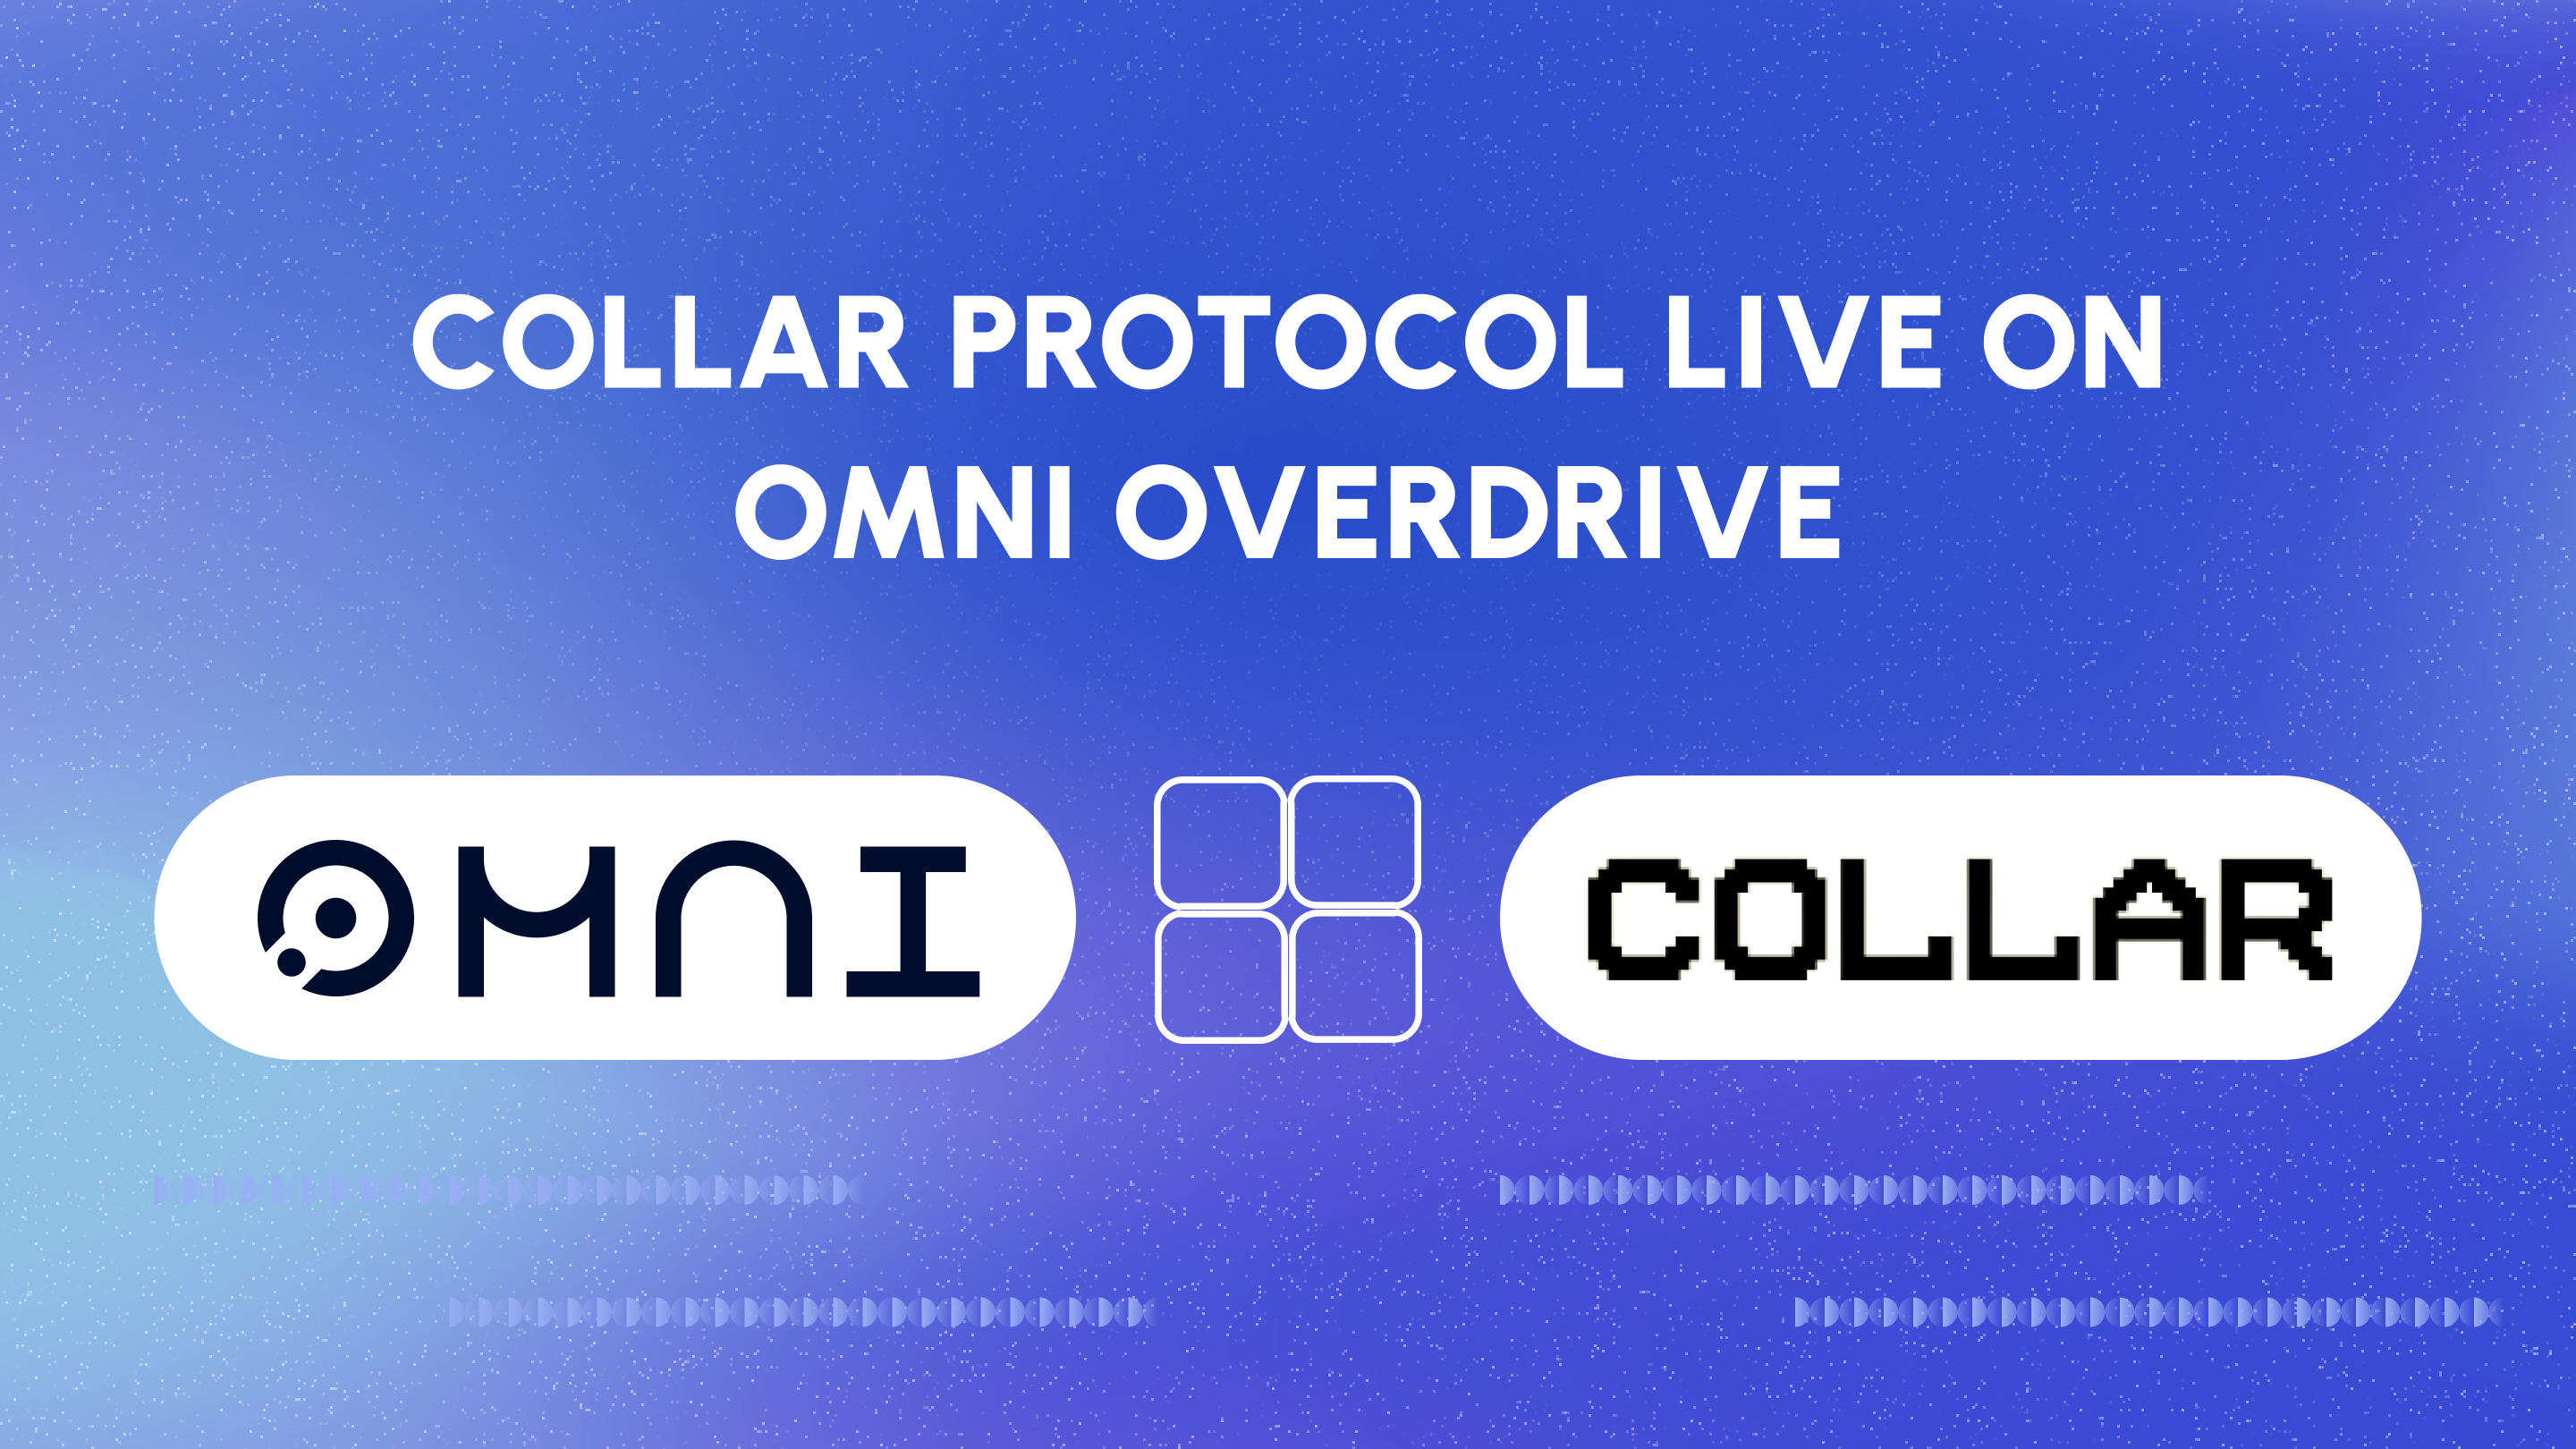 Collar Protocol Deployment On Omni Overdrive: A Step-by-Step Guide to Your First Mission